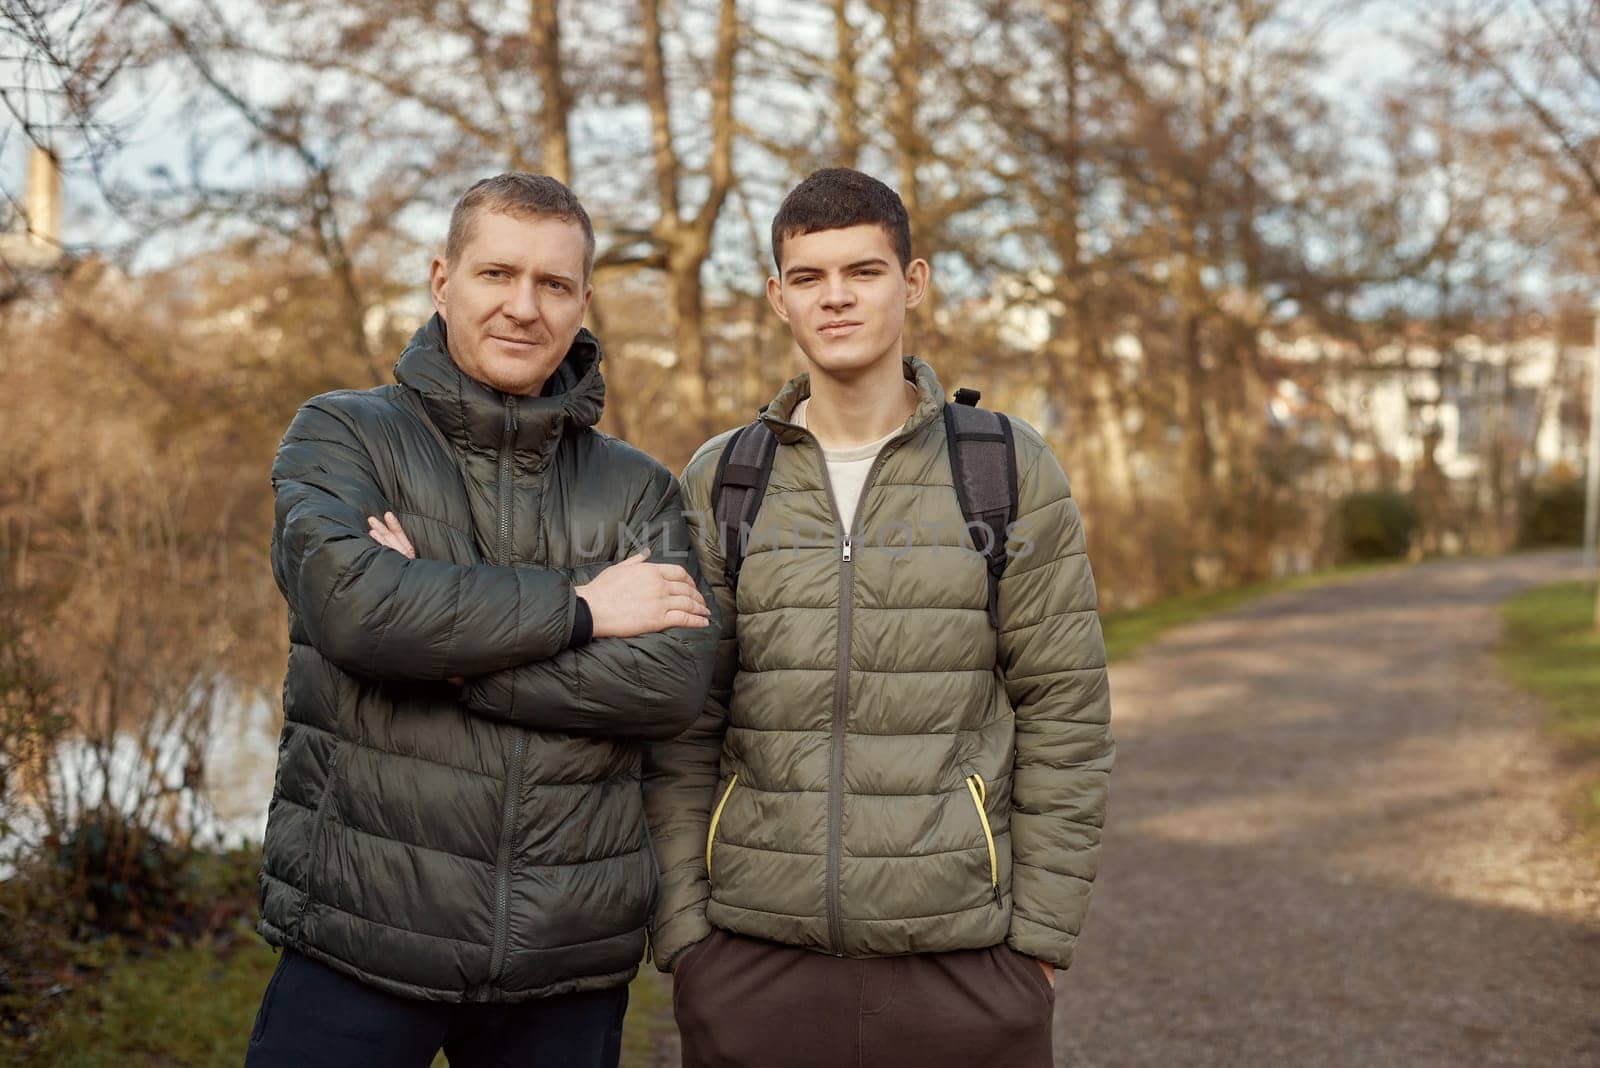 Father-Son Bond: Handsome 40-Year-Old Man and 17-Year-Old Son Standing Together in Winter or Autumn Park. by Andrii_Ko